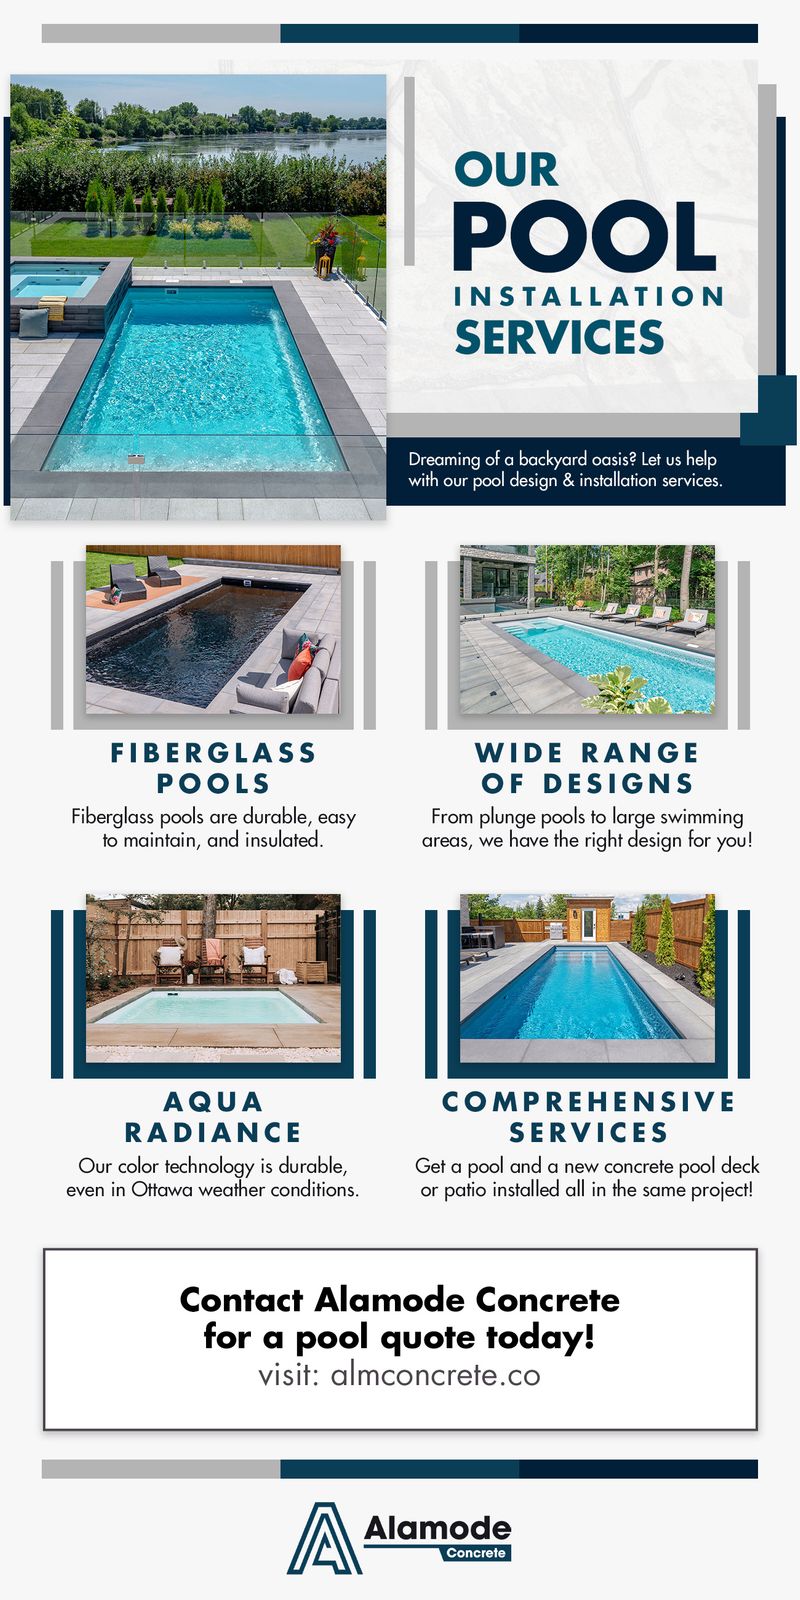 C1493 - Infographic - Our Pool Installation Services.jpg